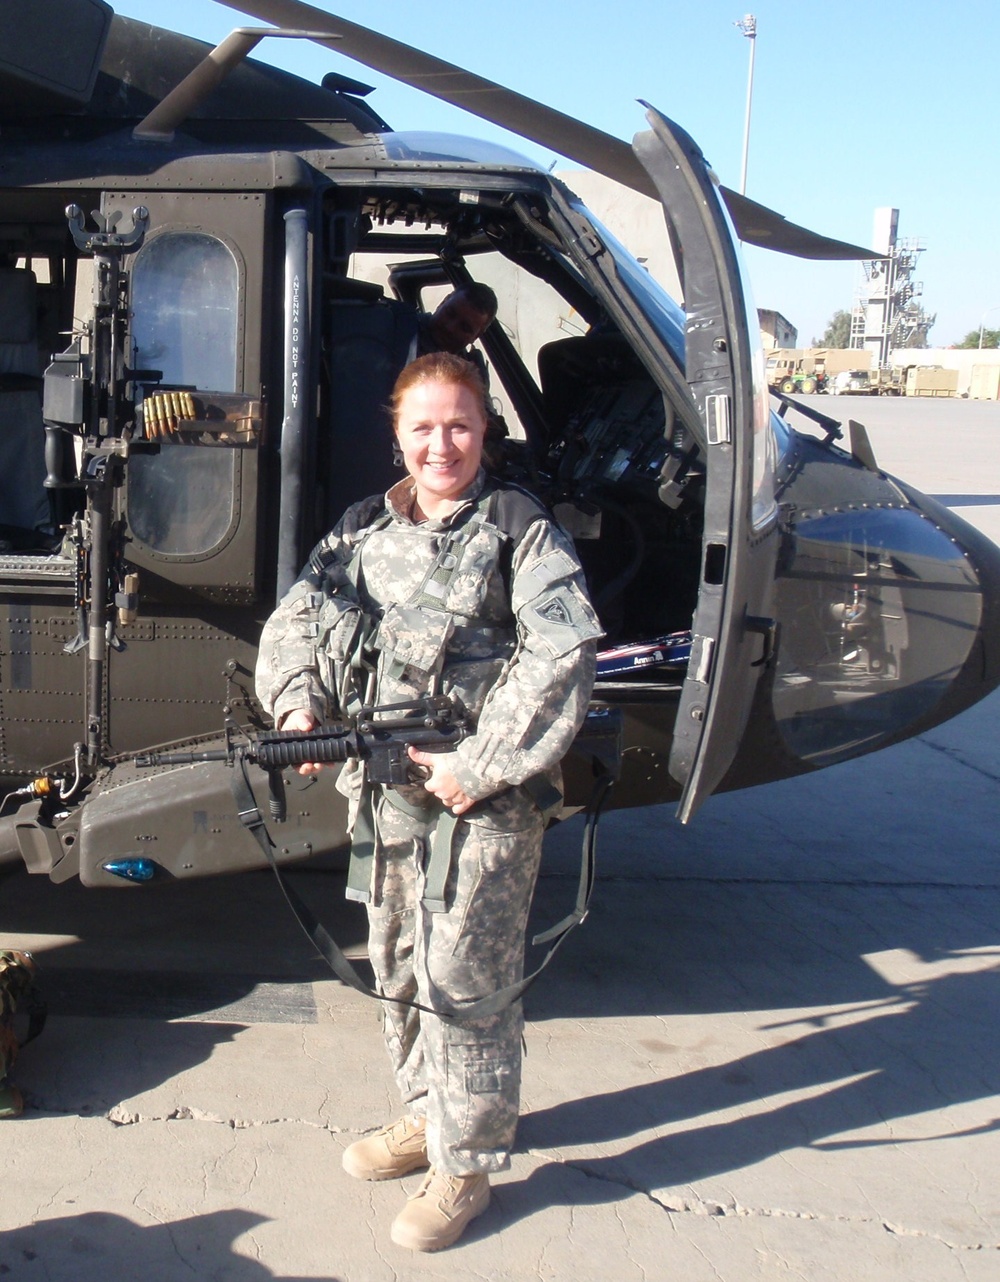 U.S. Army Col. Harper reflects on 30 years of service during Women’s History Month